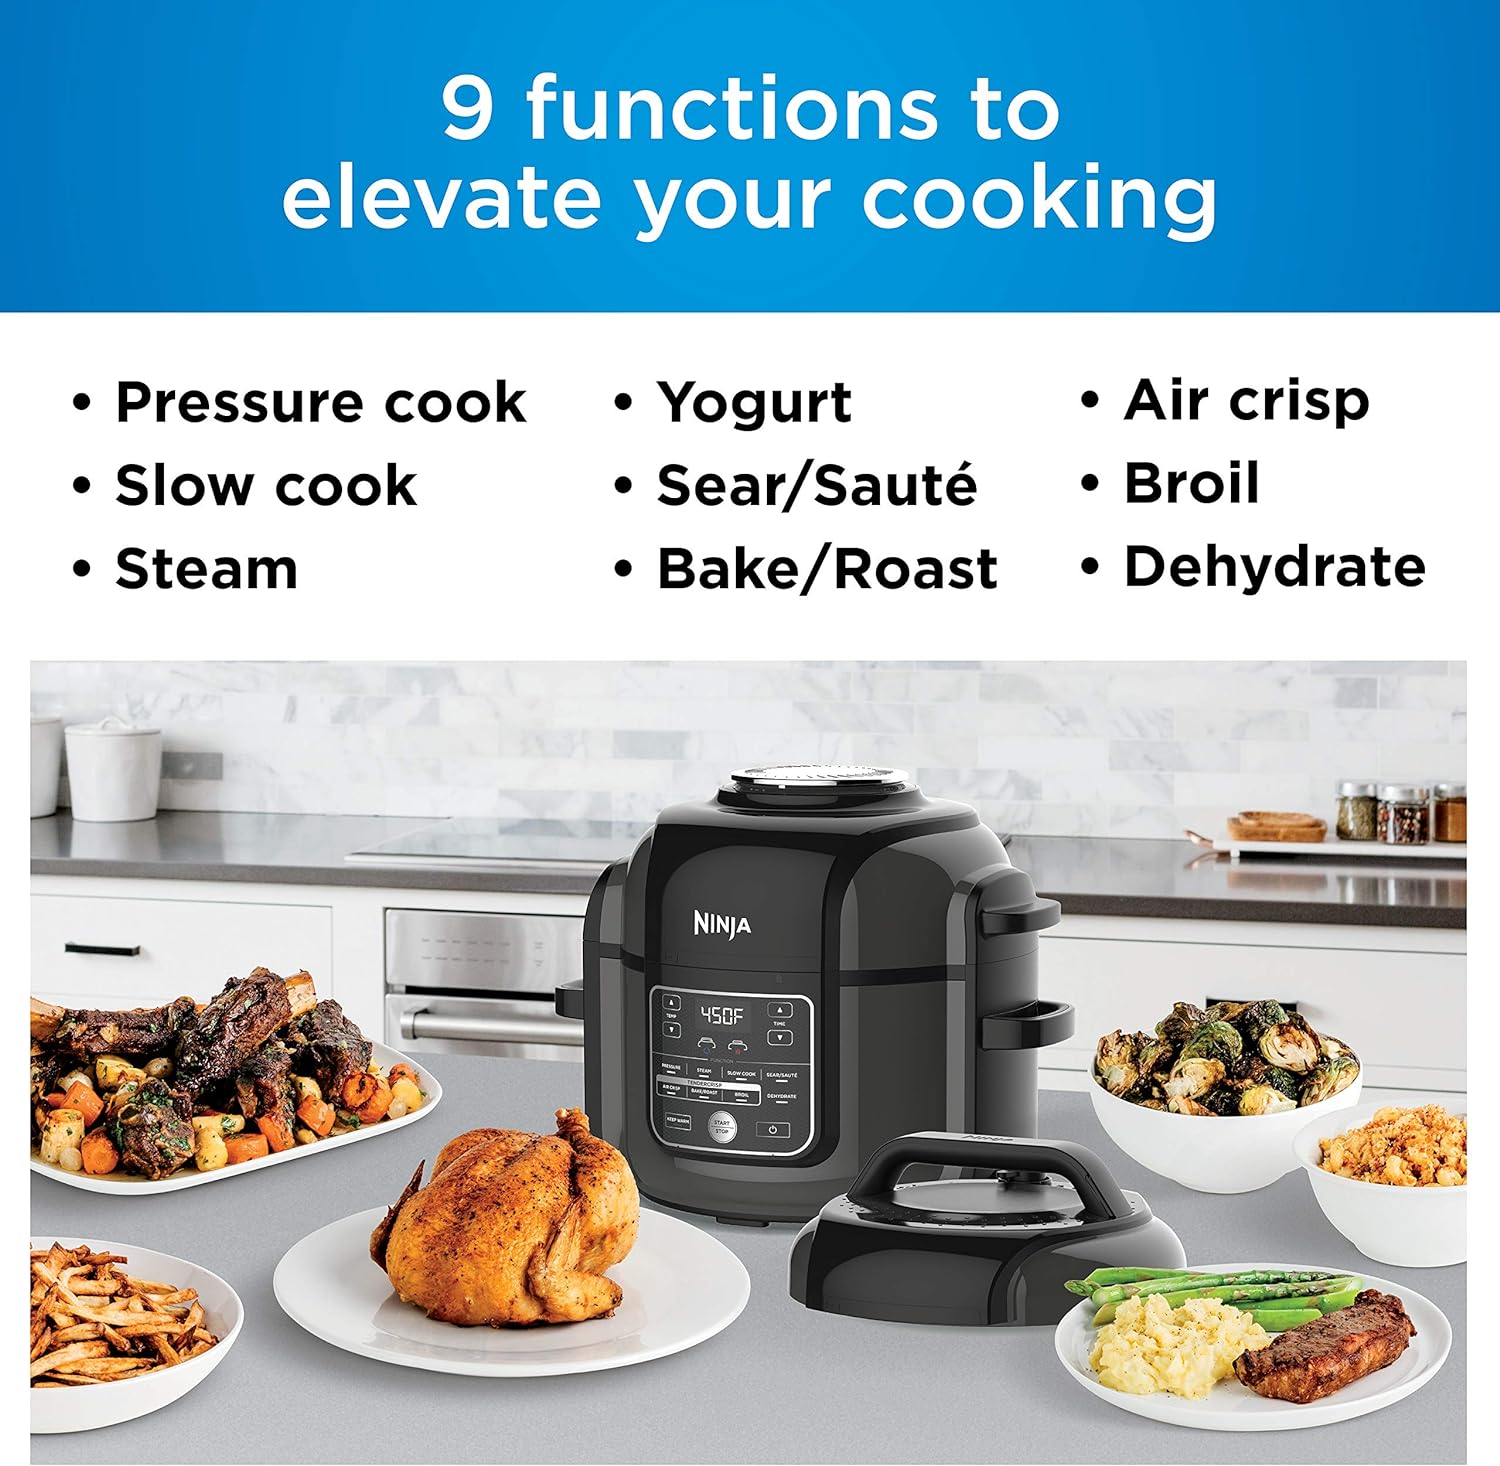 Ninja OP302 Foodi 9-in-1 Pressure, Broil, Dehydrate, Slow Cooker, Air Fryer, and More, with 6.5 Quart Capacity and 45 Recipe Book, an